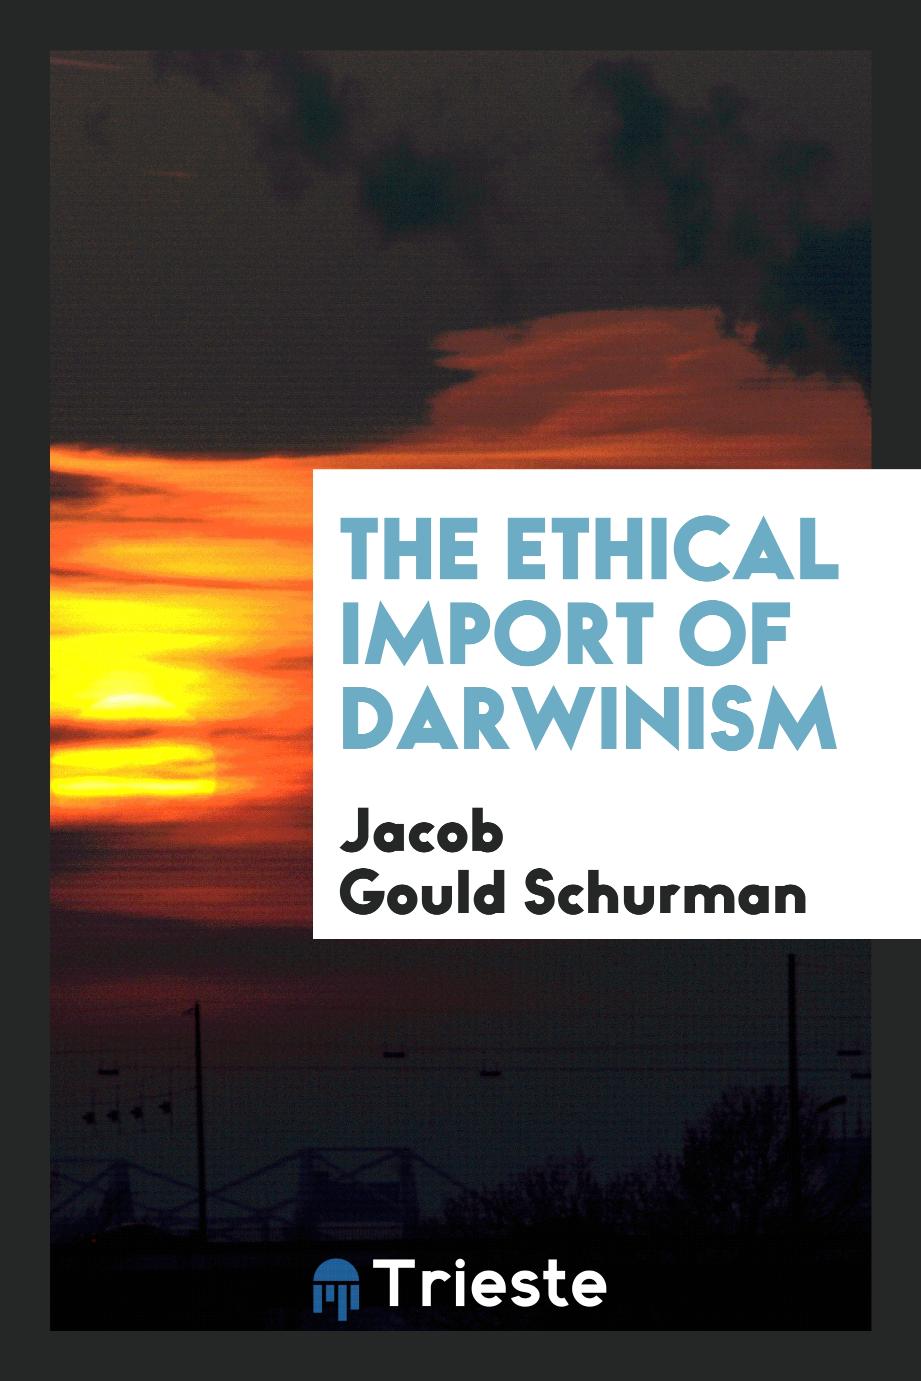 The ethical import of Darwinism